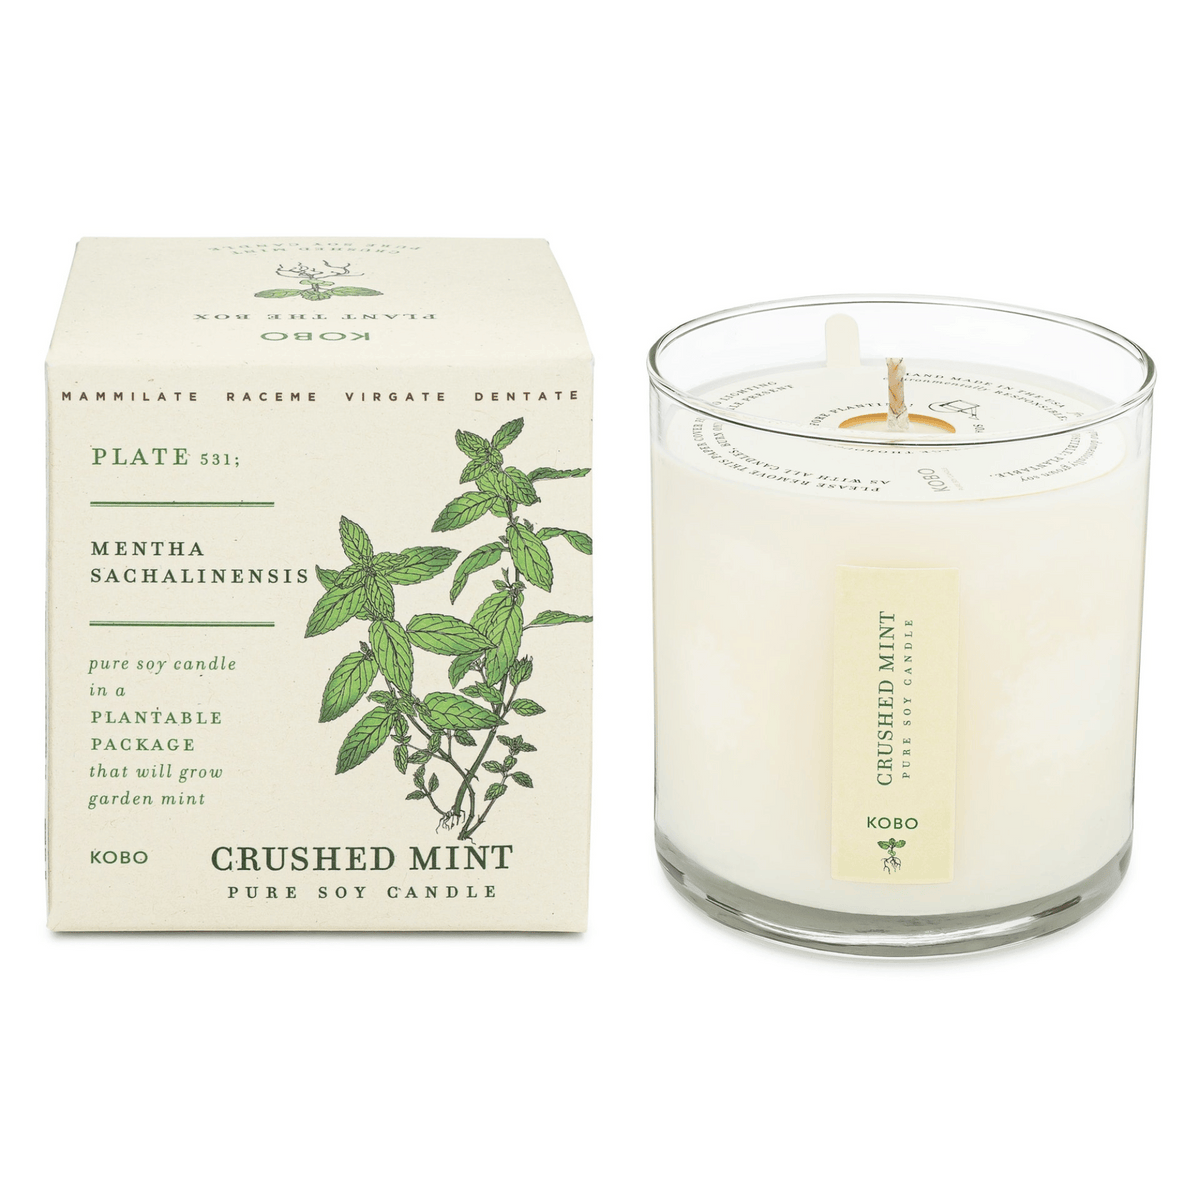 Primary Image of Crushed Mint Plant the Box Candle